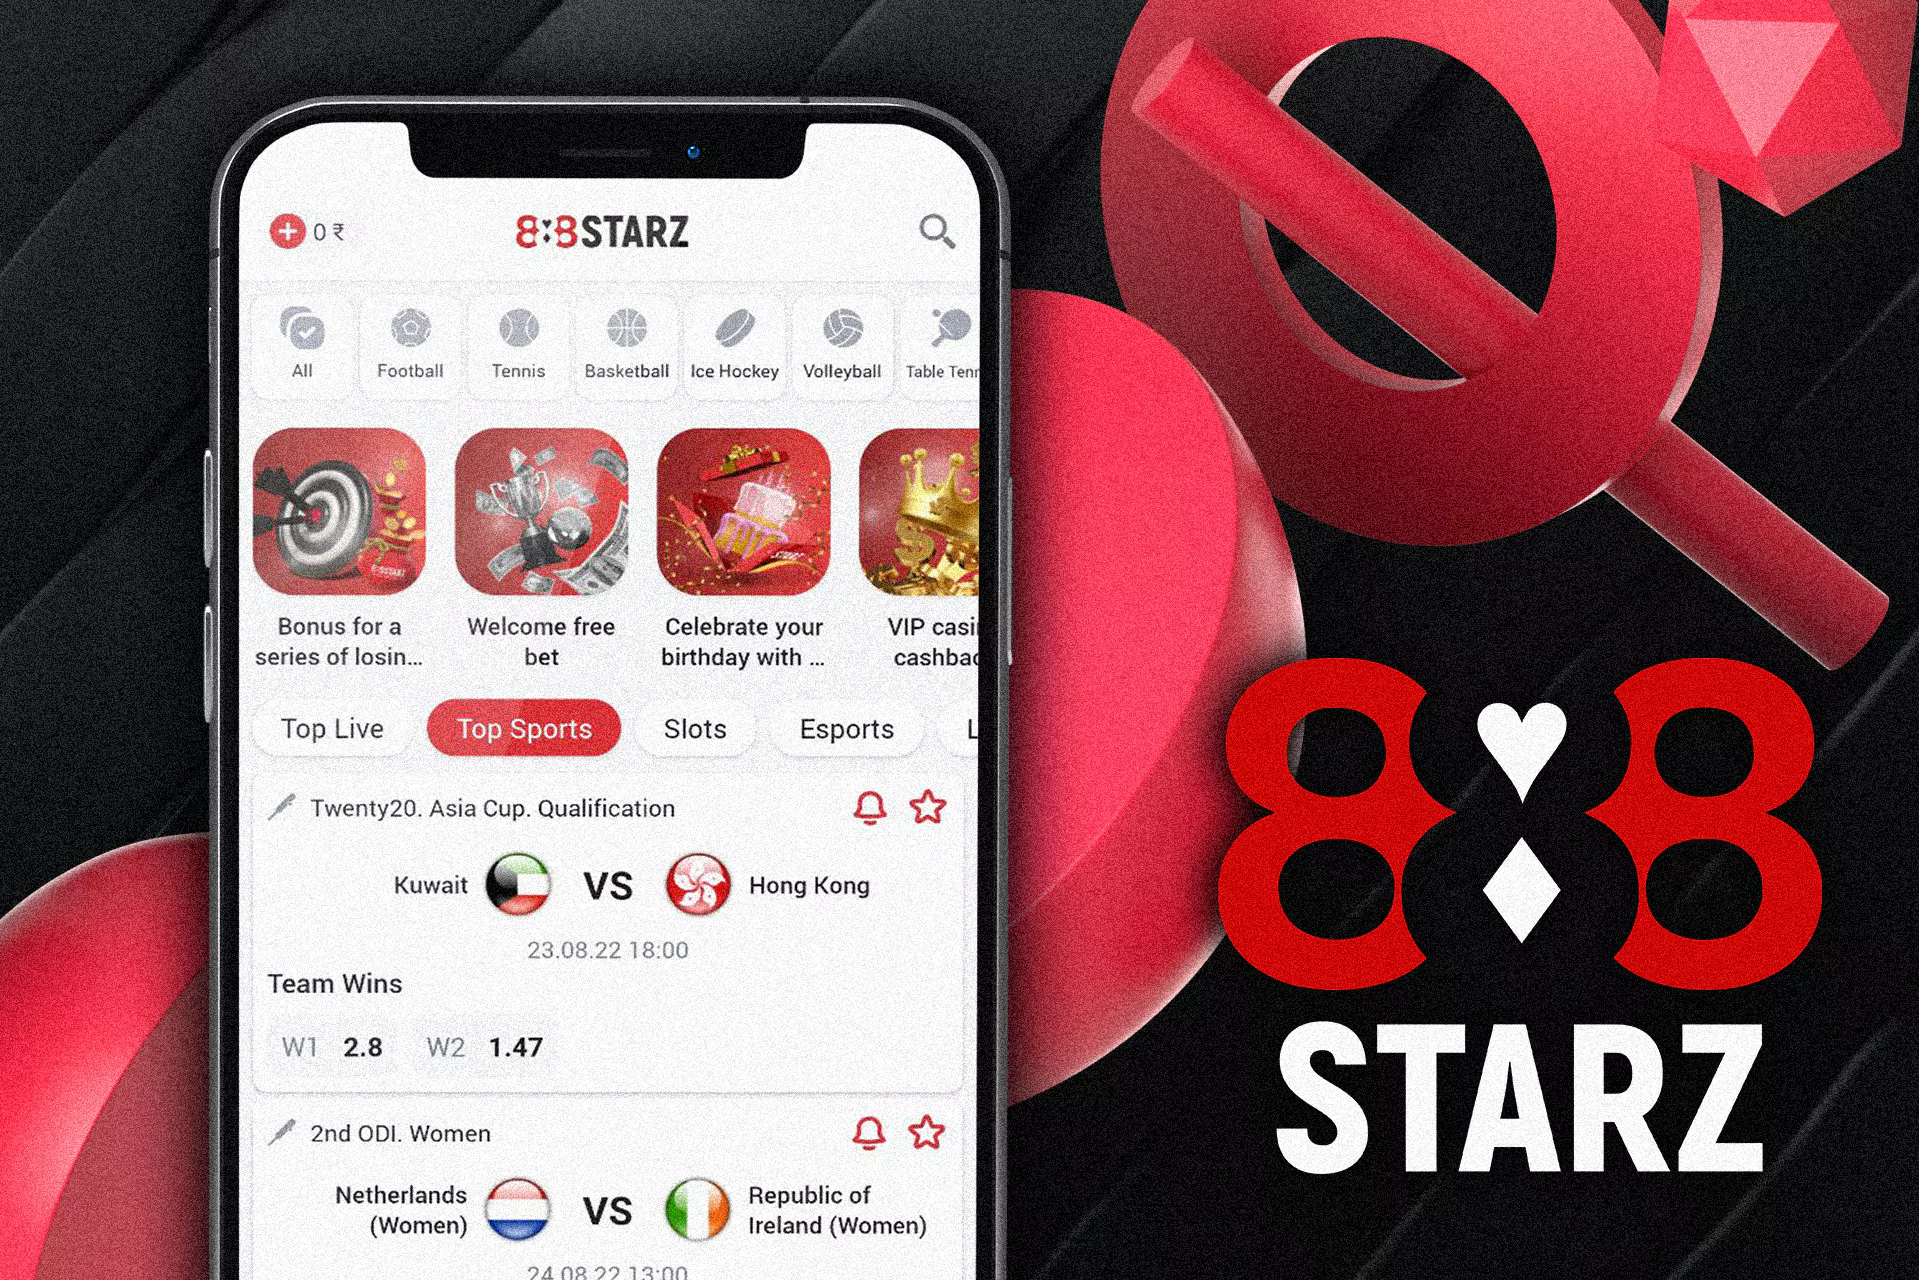 The 888starz has a great mobile application with a fine interface and a good selection of matches.